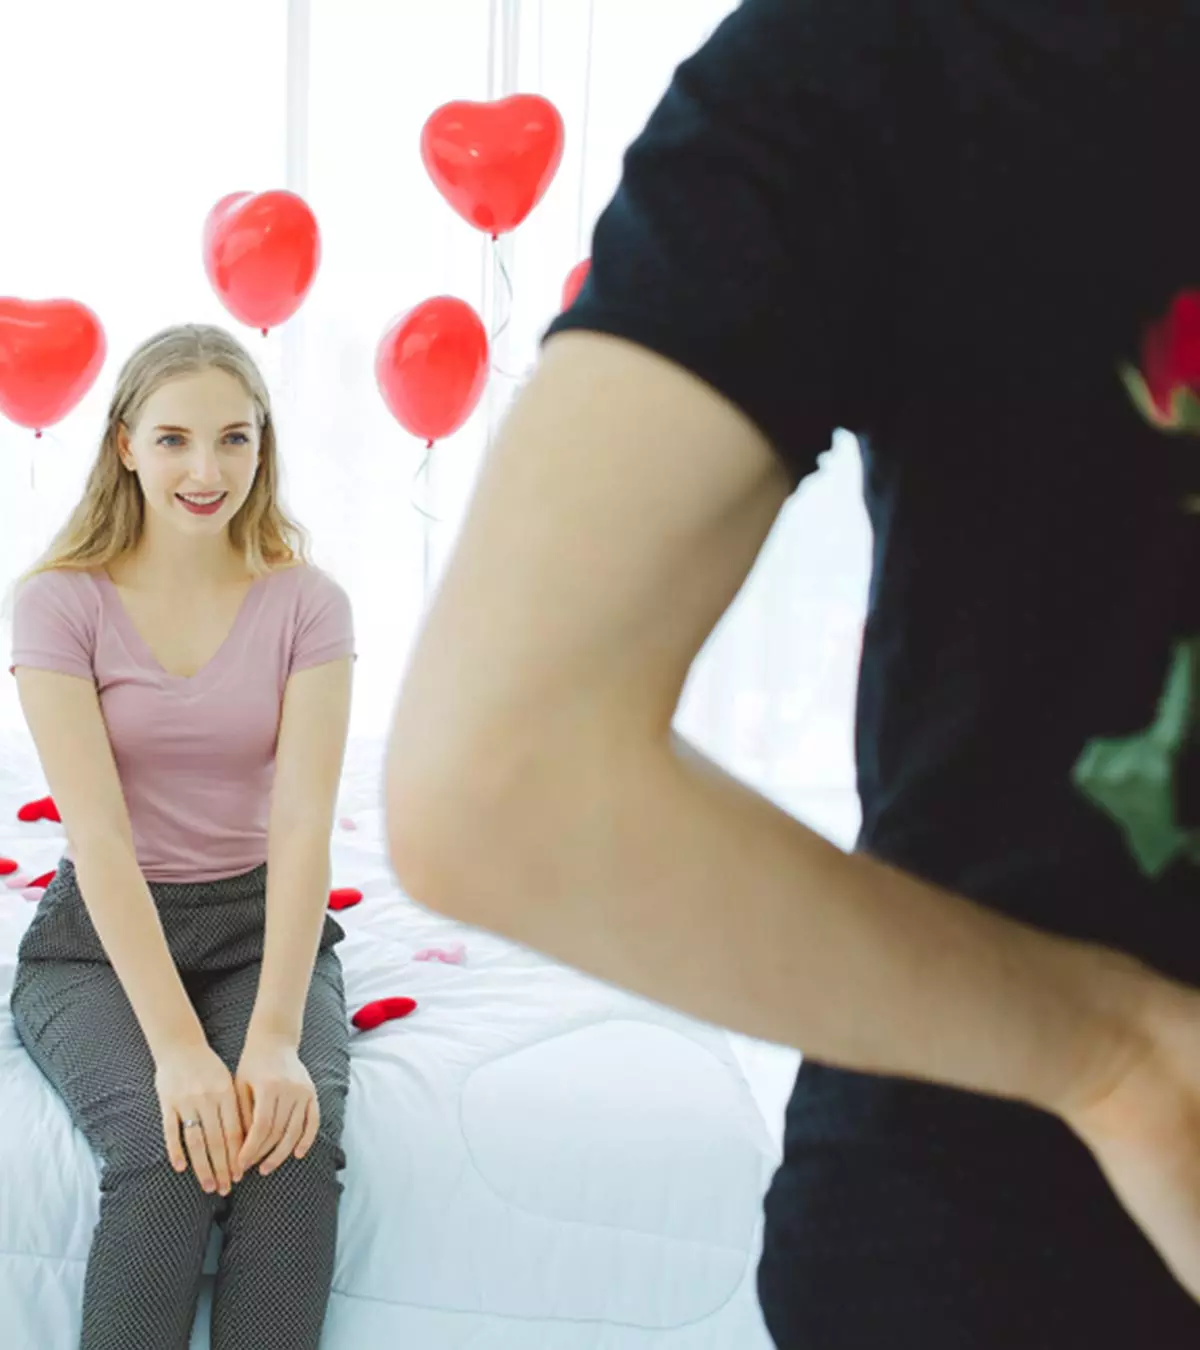 35 Simple Yet Romantic Ways to Make Her Feel Special